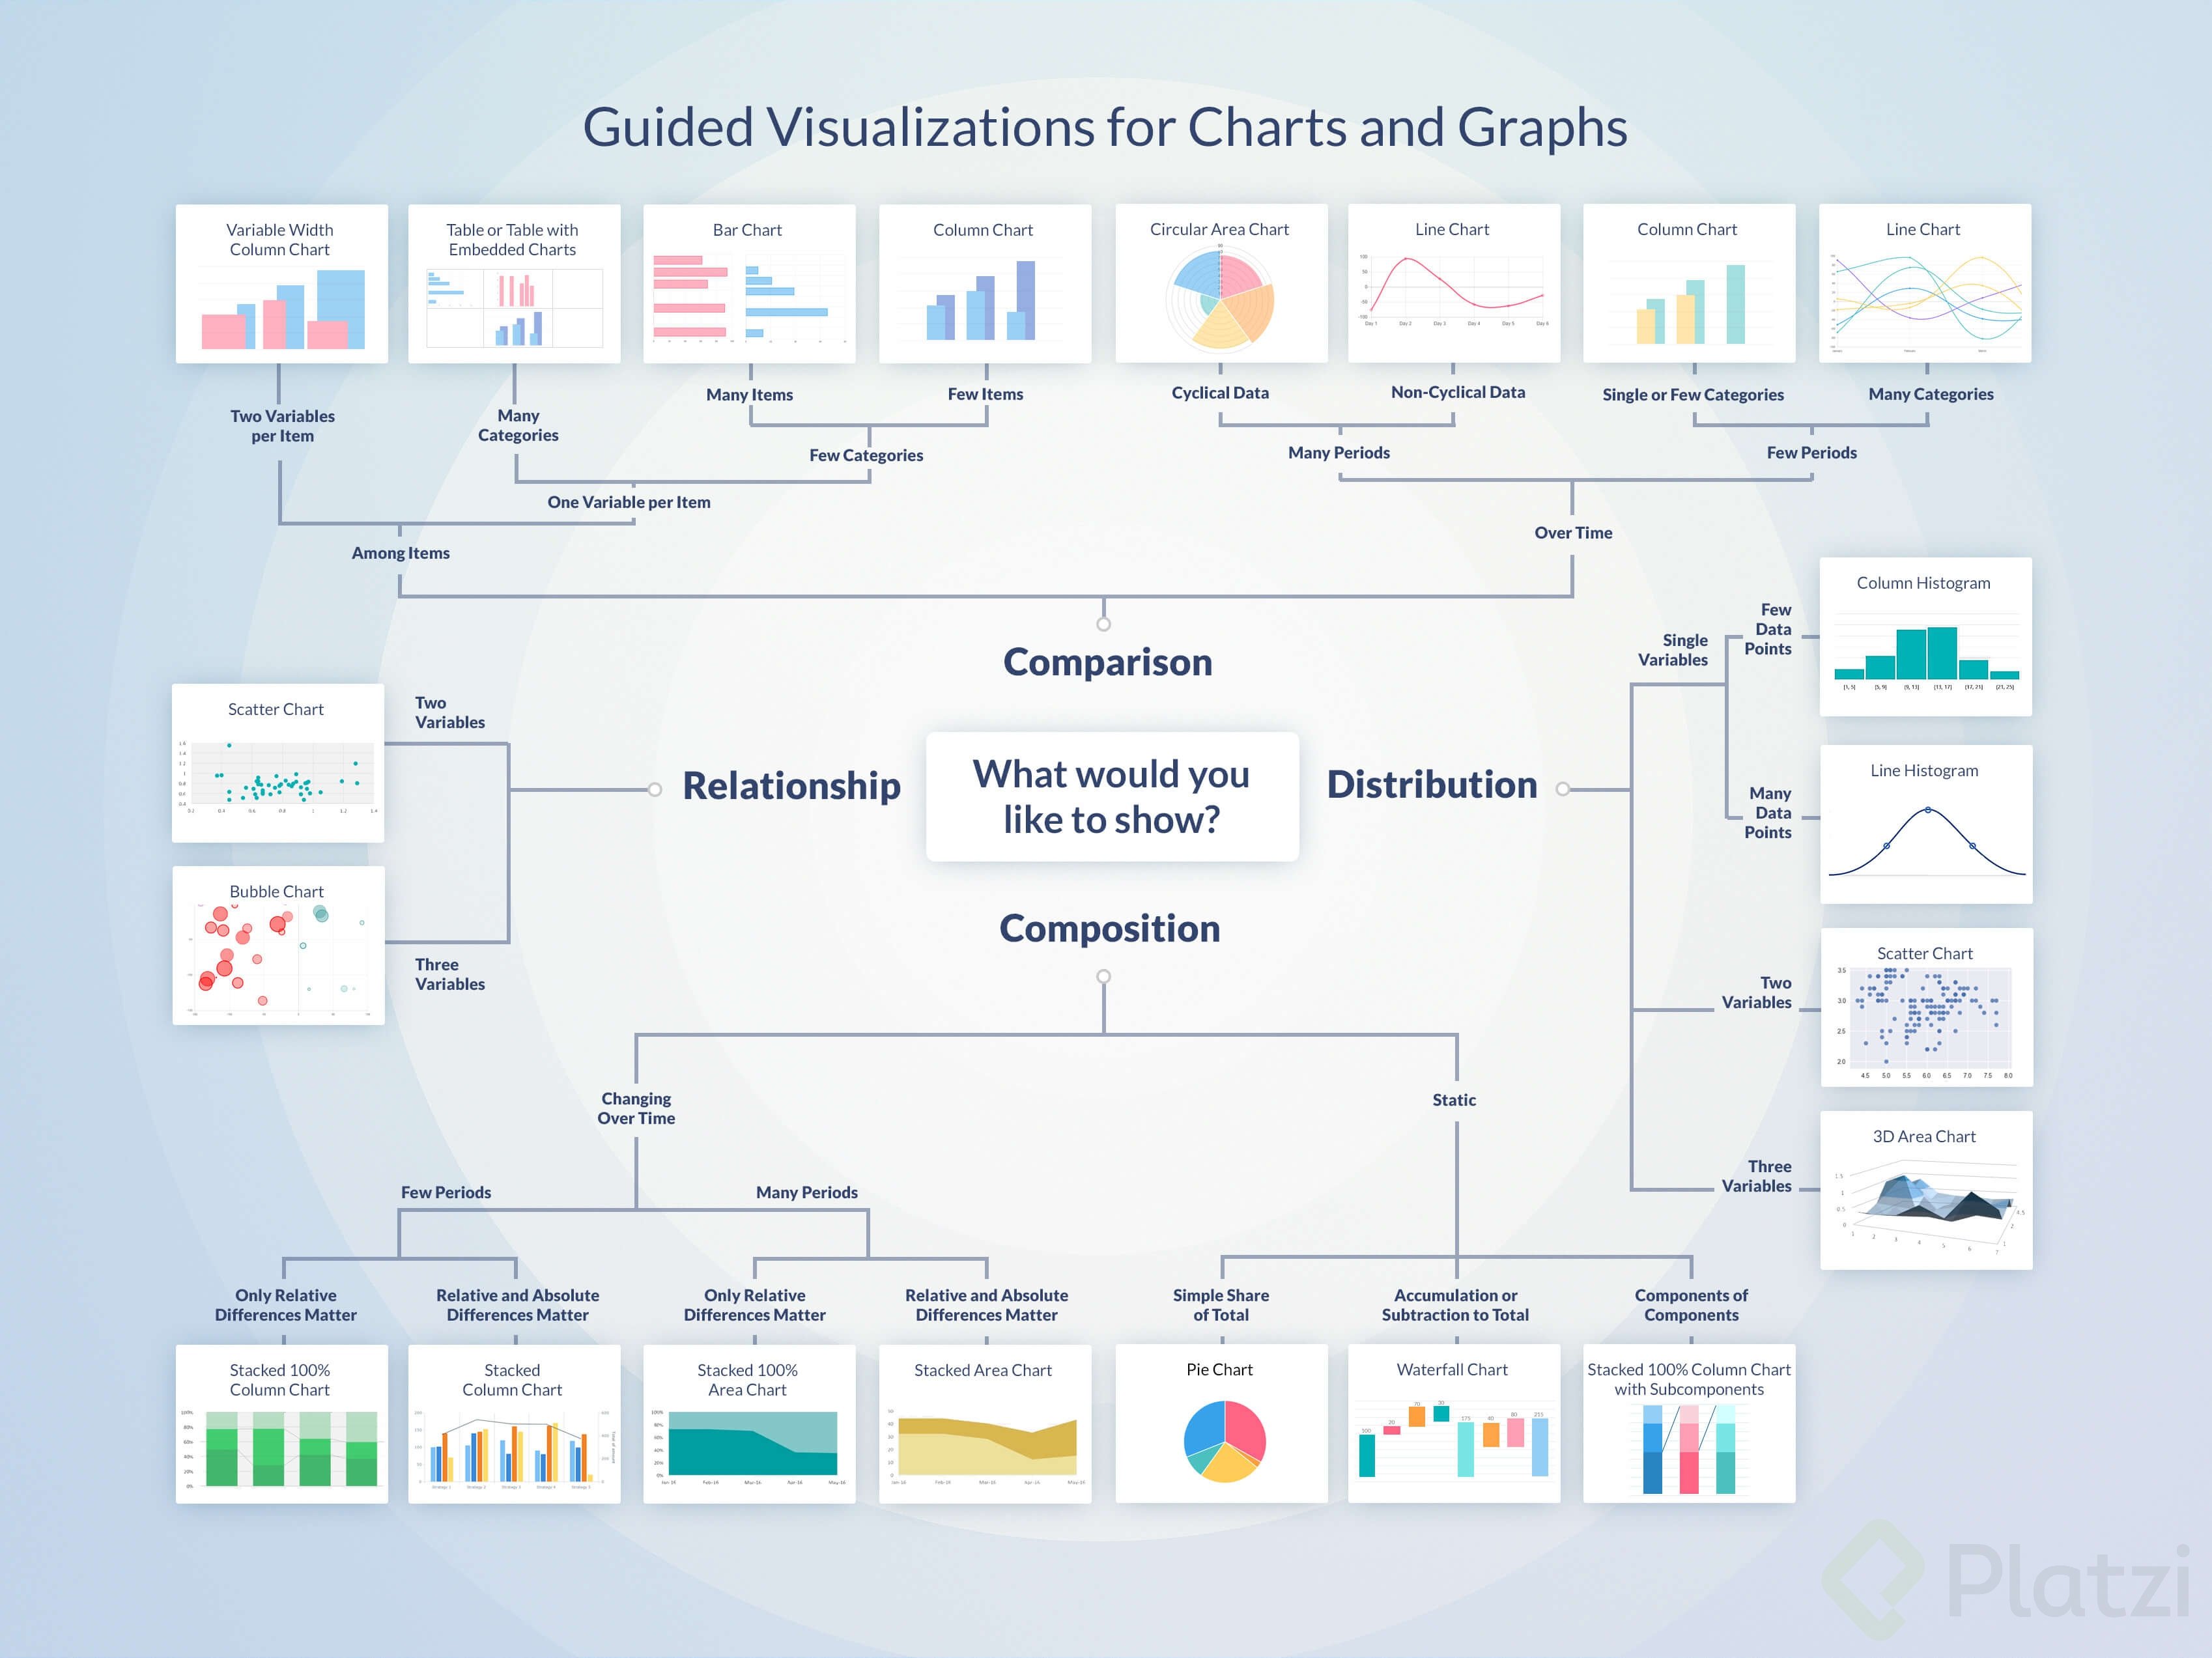 How-to-Visualize-your-Data-with-Charts-and-Graphs.jpg